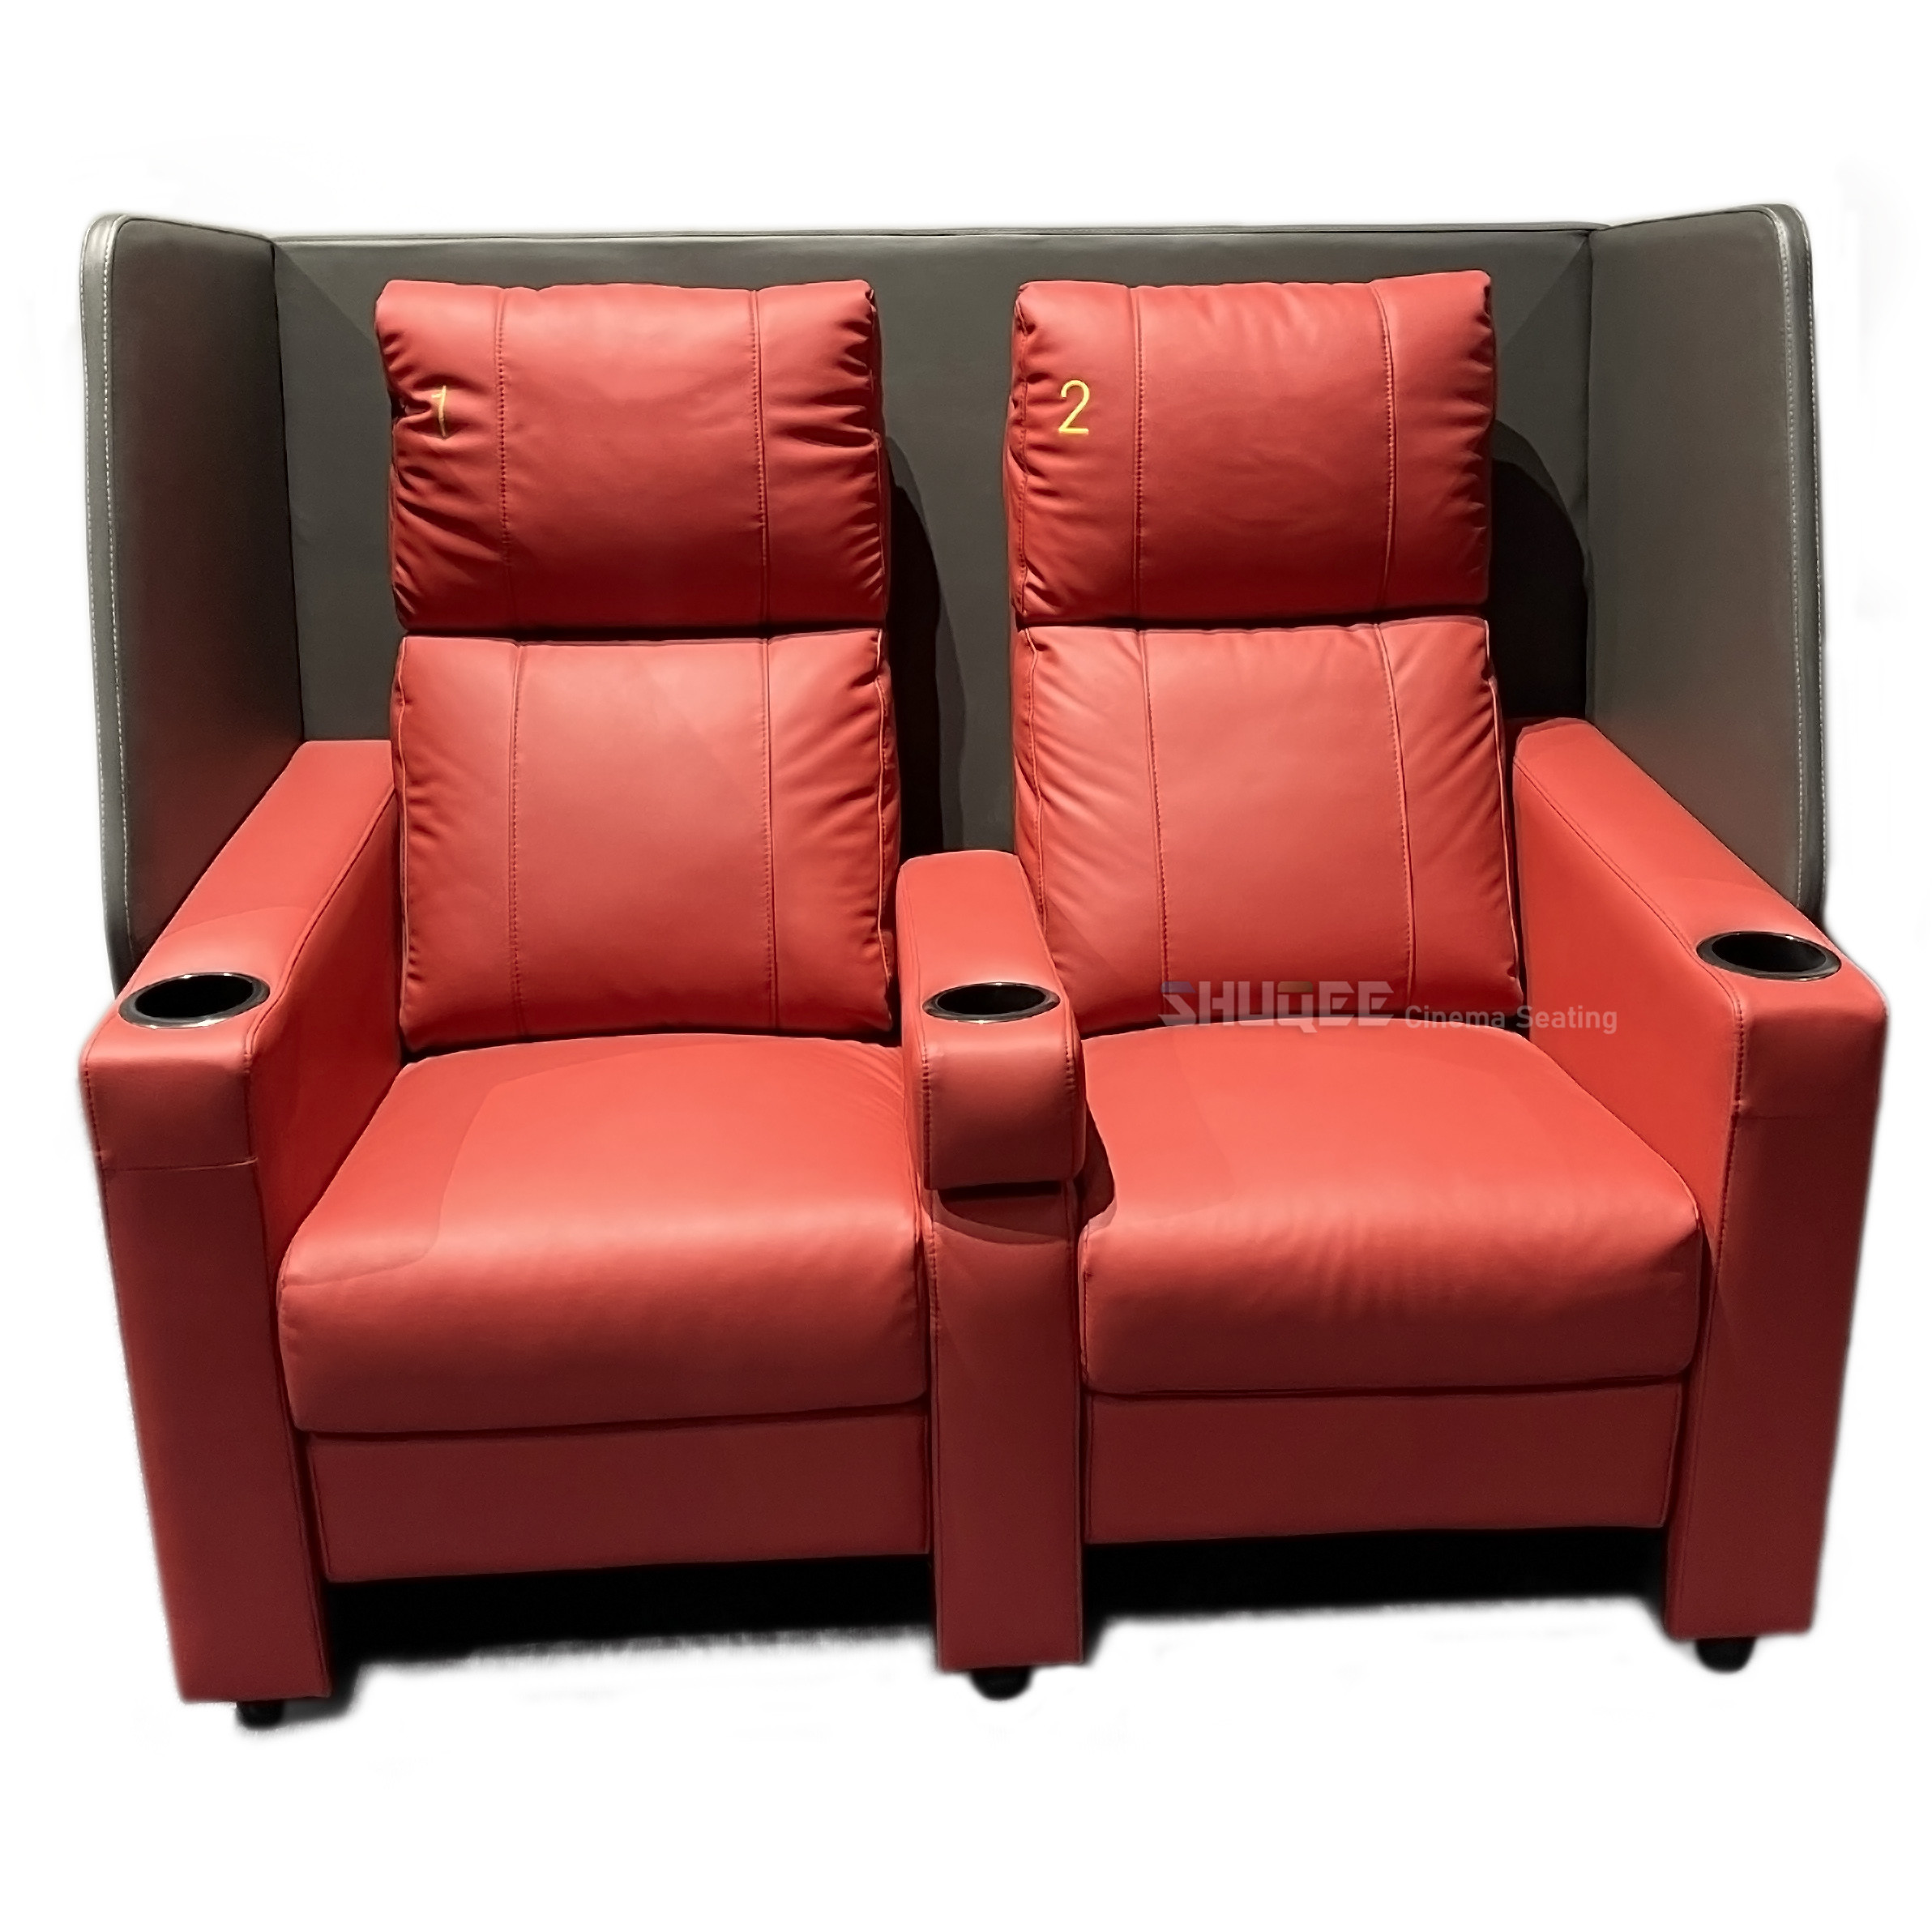 China Genuine Leather Cinema VIP Sofa Luxury Home Theater Lover Seats Recliner wholesale